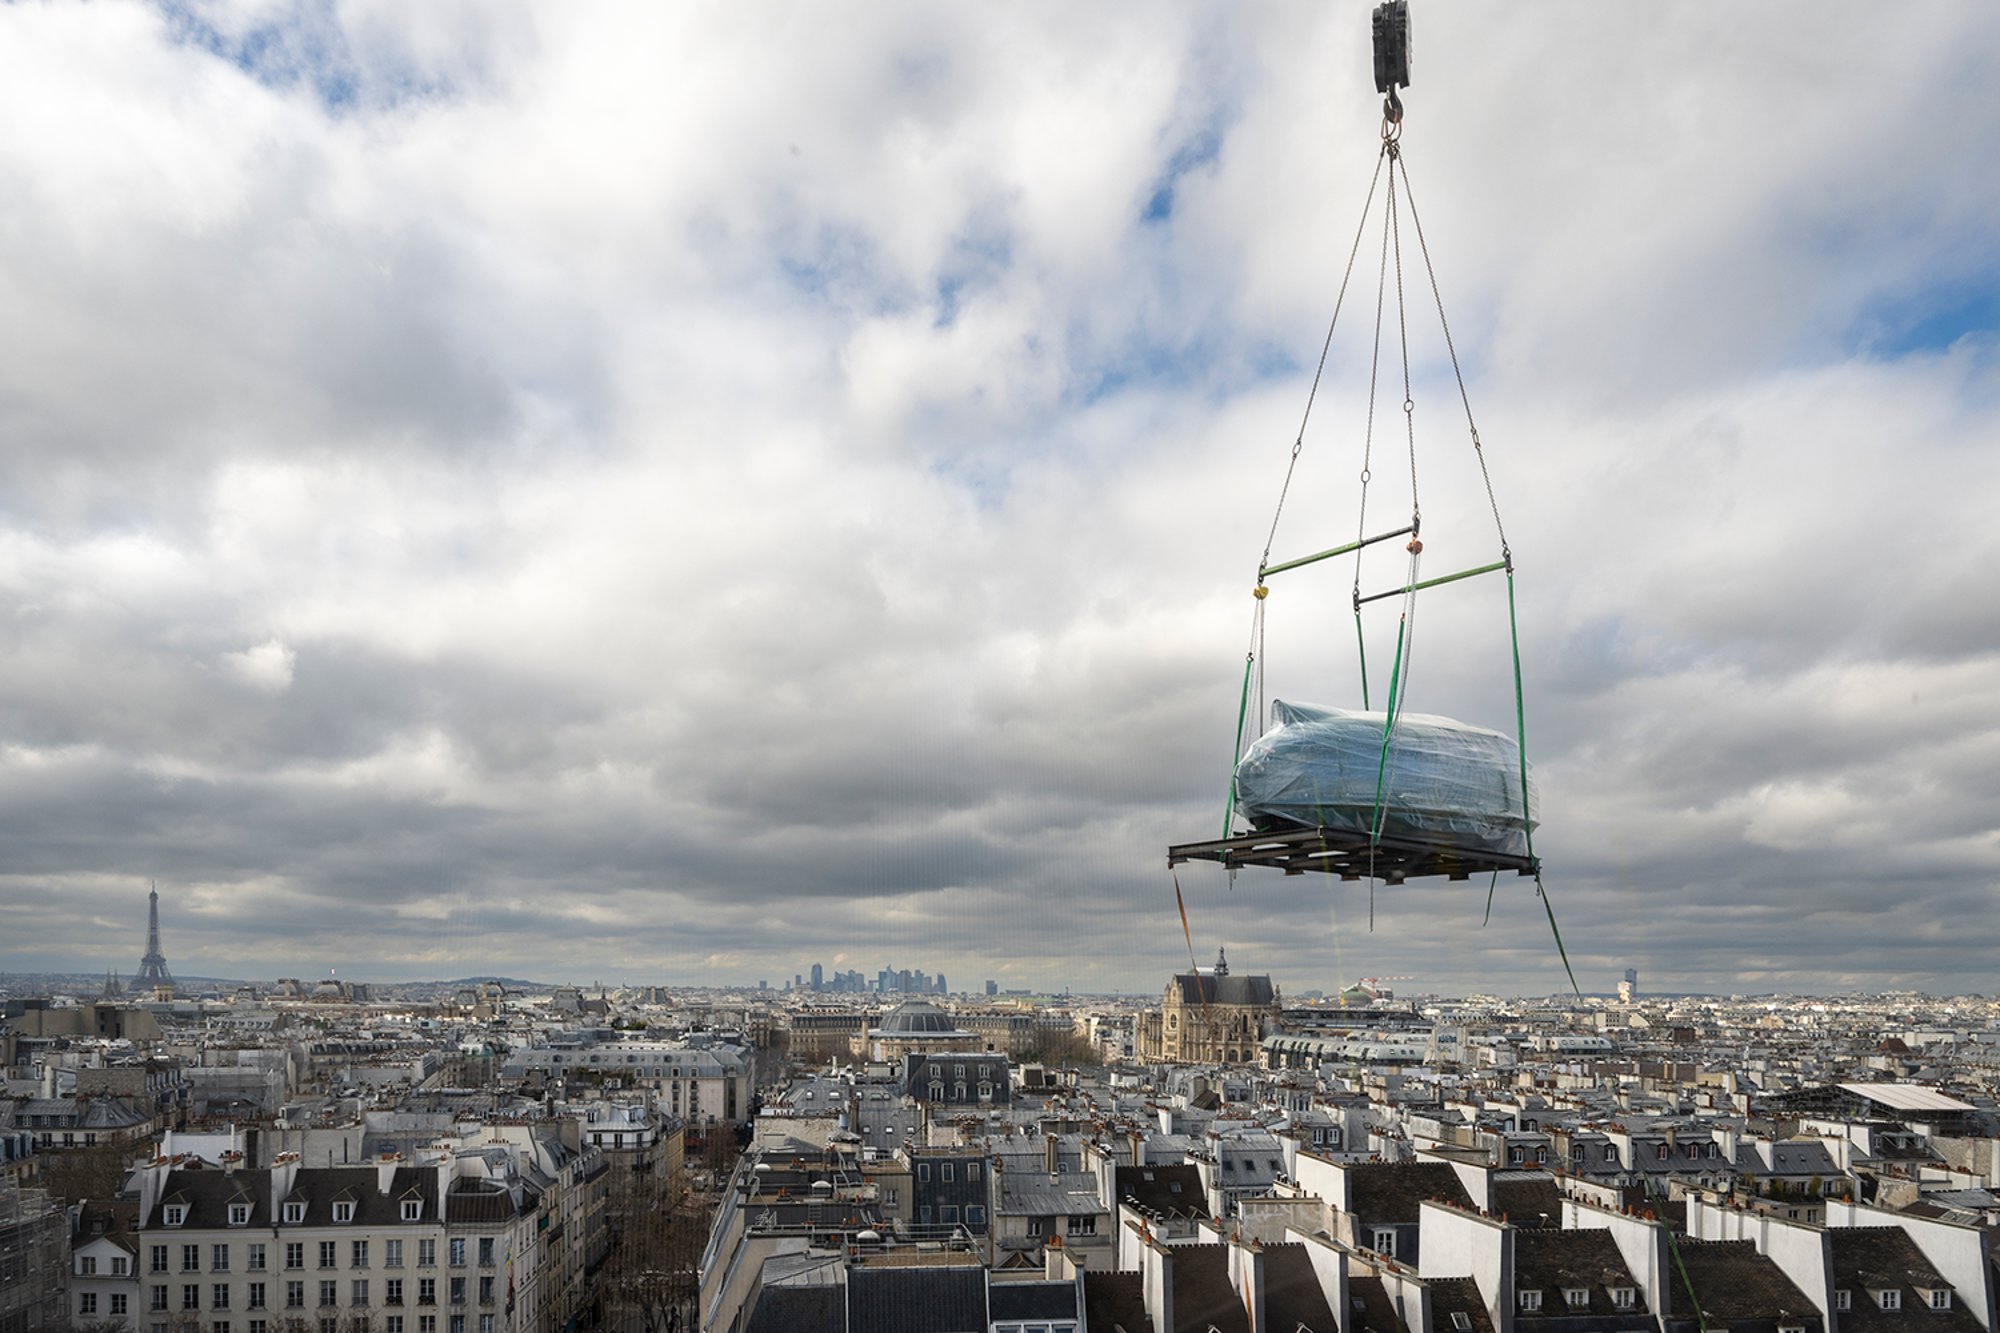 The Dymaxion Car #4 being lifted to the the 6th floor of the Centre Pompidou, using a crane. The car was elevated from the plaza in front of the building and took a day to install. Norman Foster created the fourth version of the 1934 Dymaxion automobile, in homage to the late Richard Buckminster Fuller, with whom he collaborated for the last twelve years of the American polymath's life.